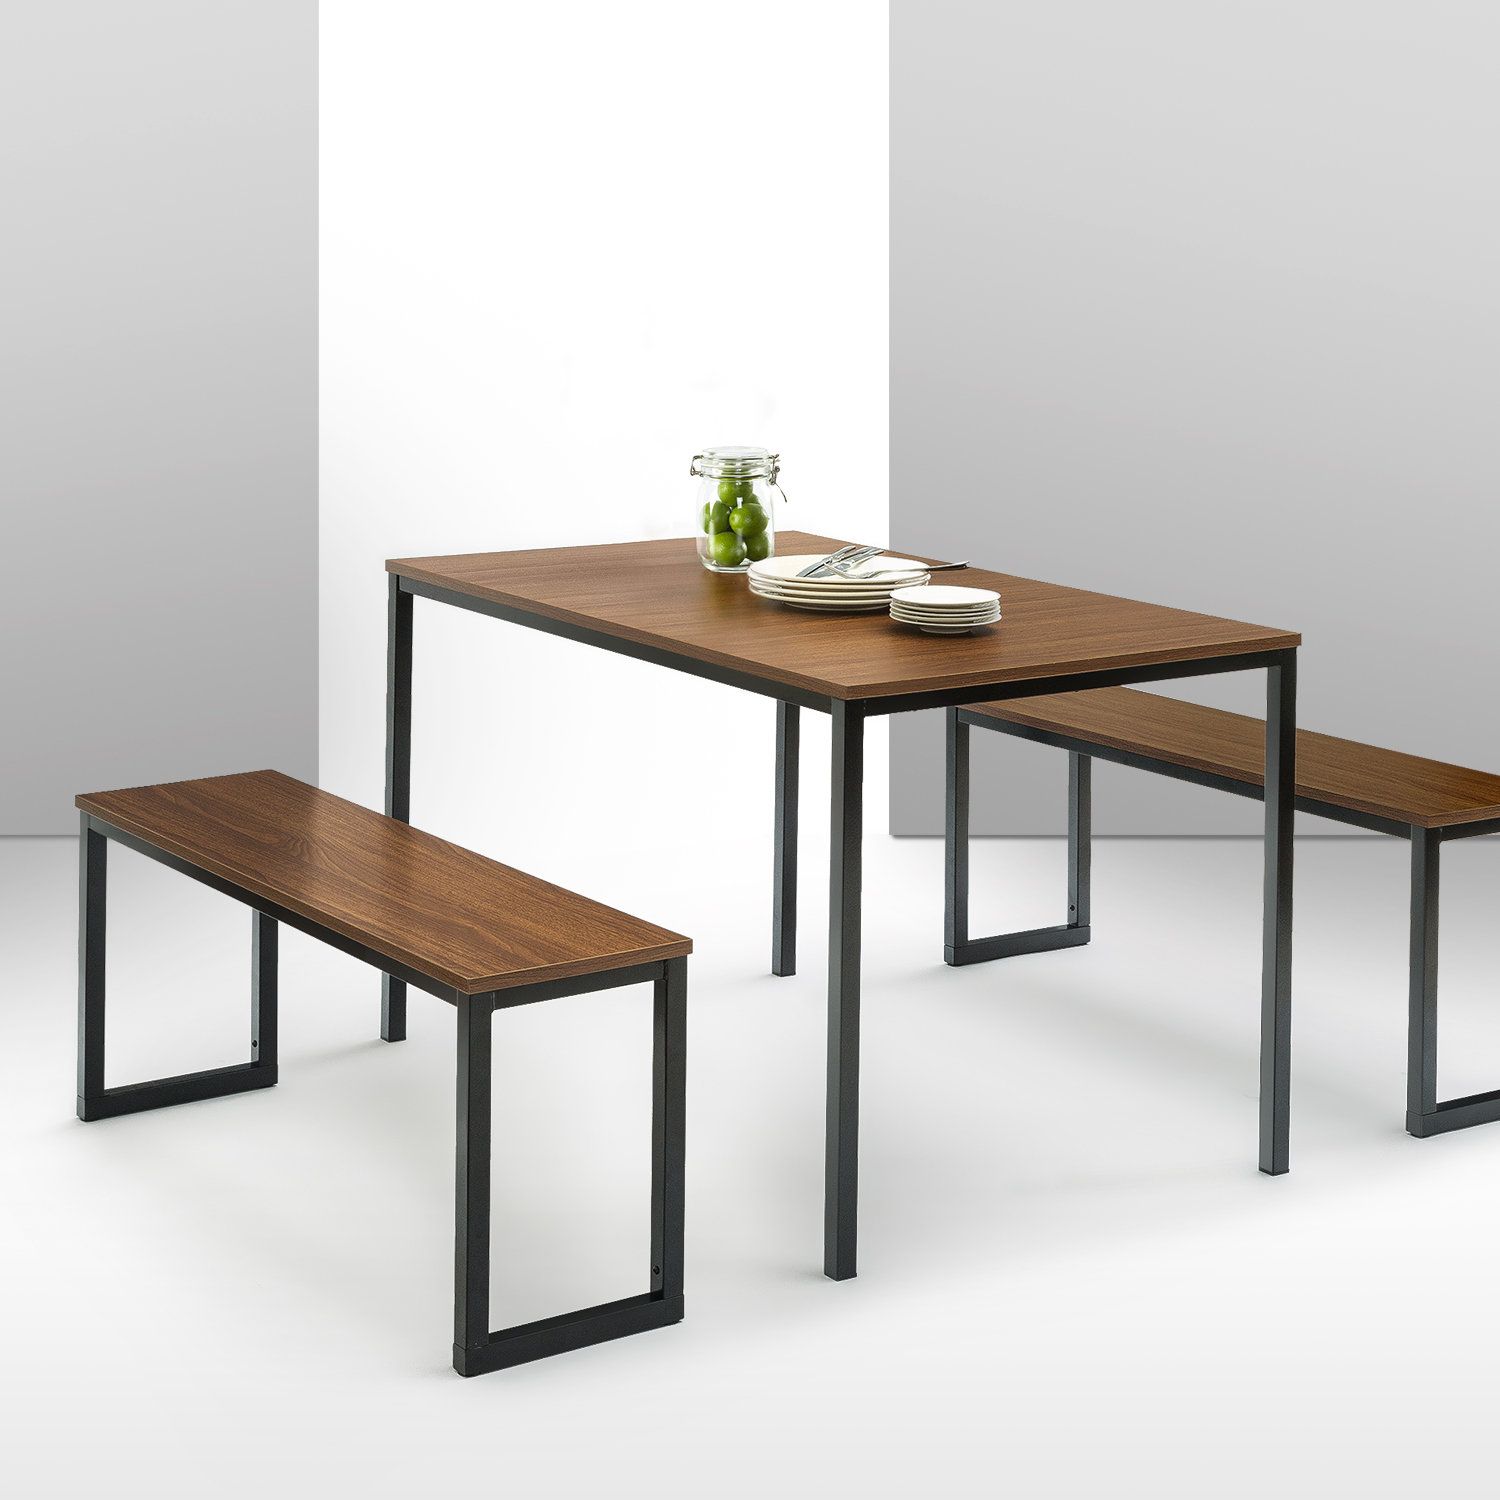 Frida 3 Piece Dining Table Set Inside Most Current Ryker 3 Piece Dining Sets (View 4 of 20)